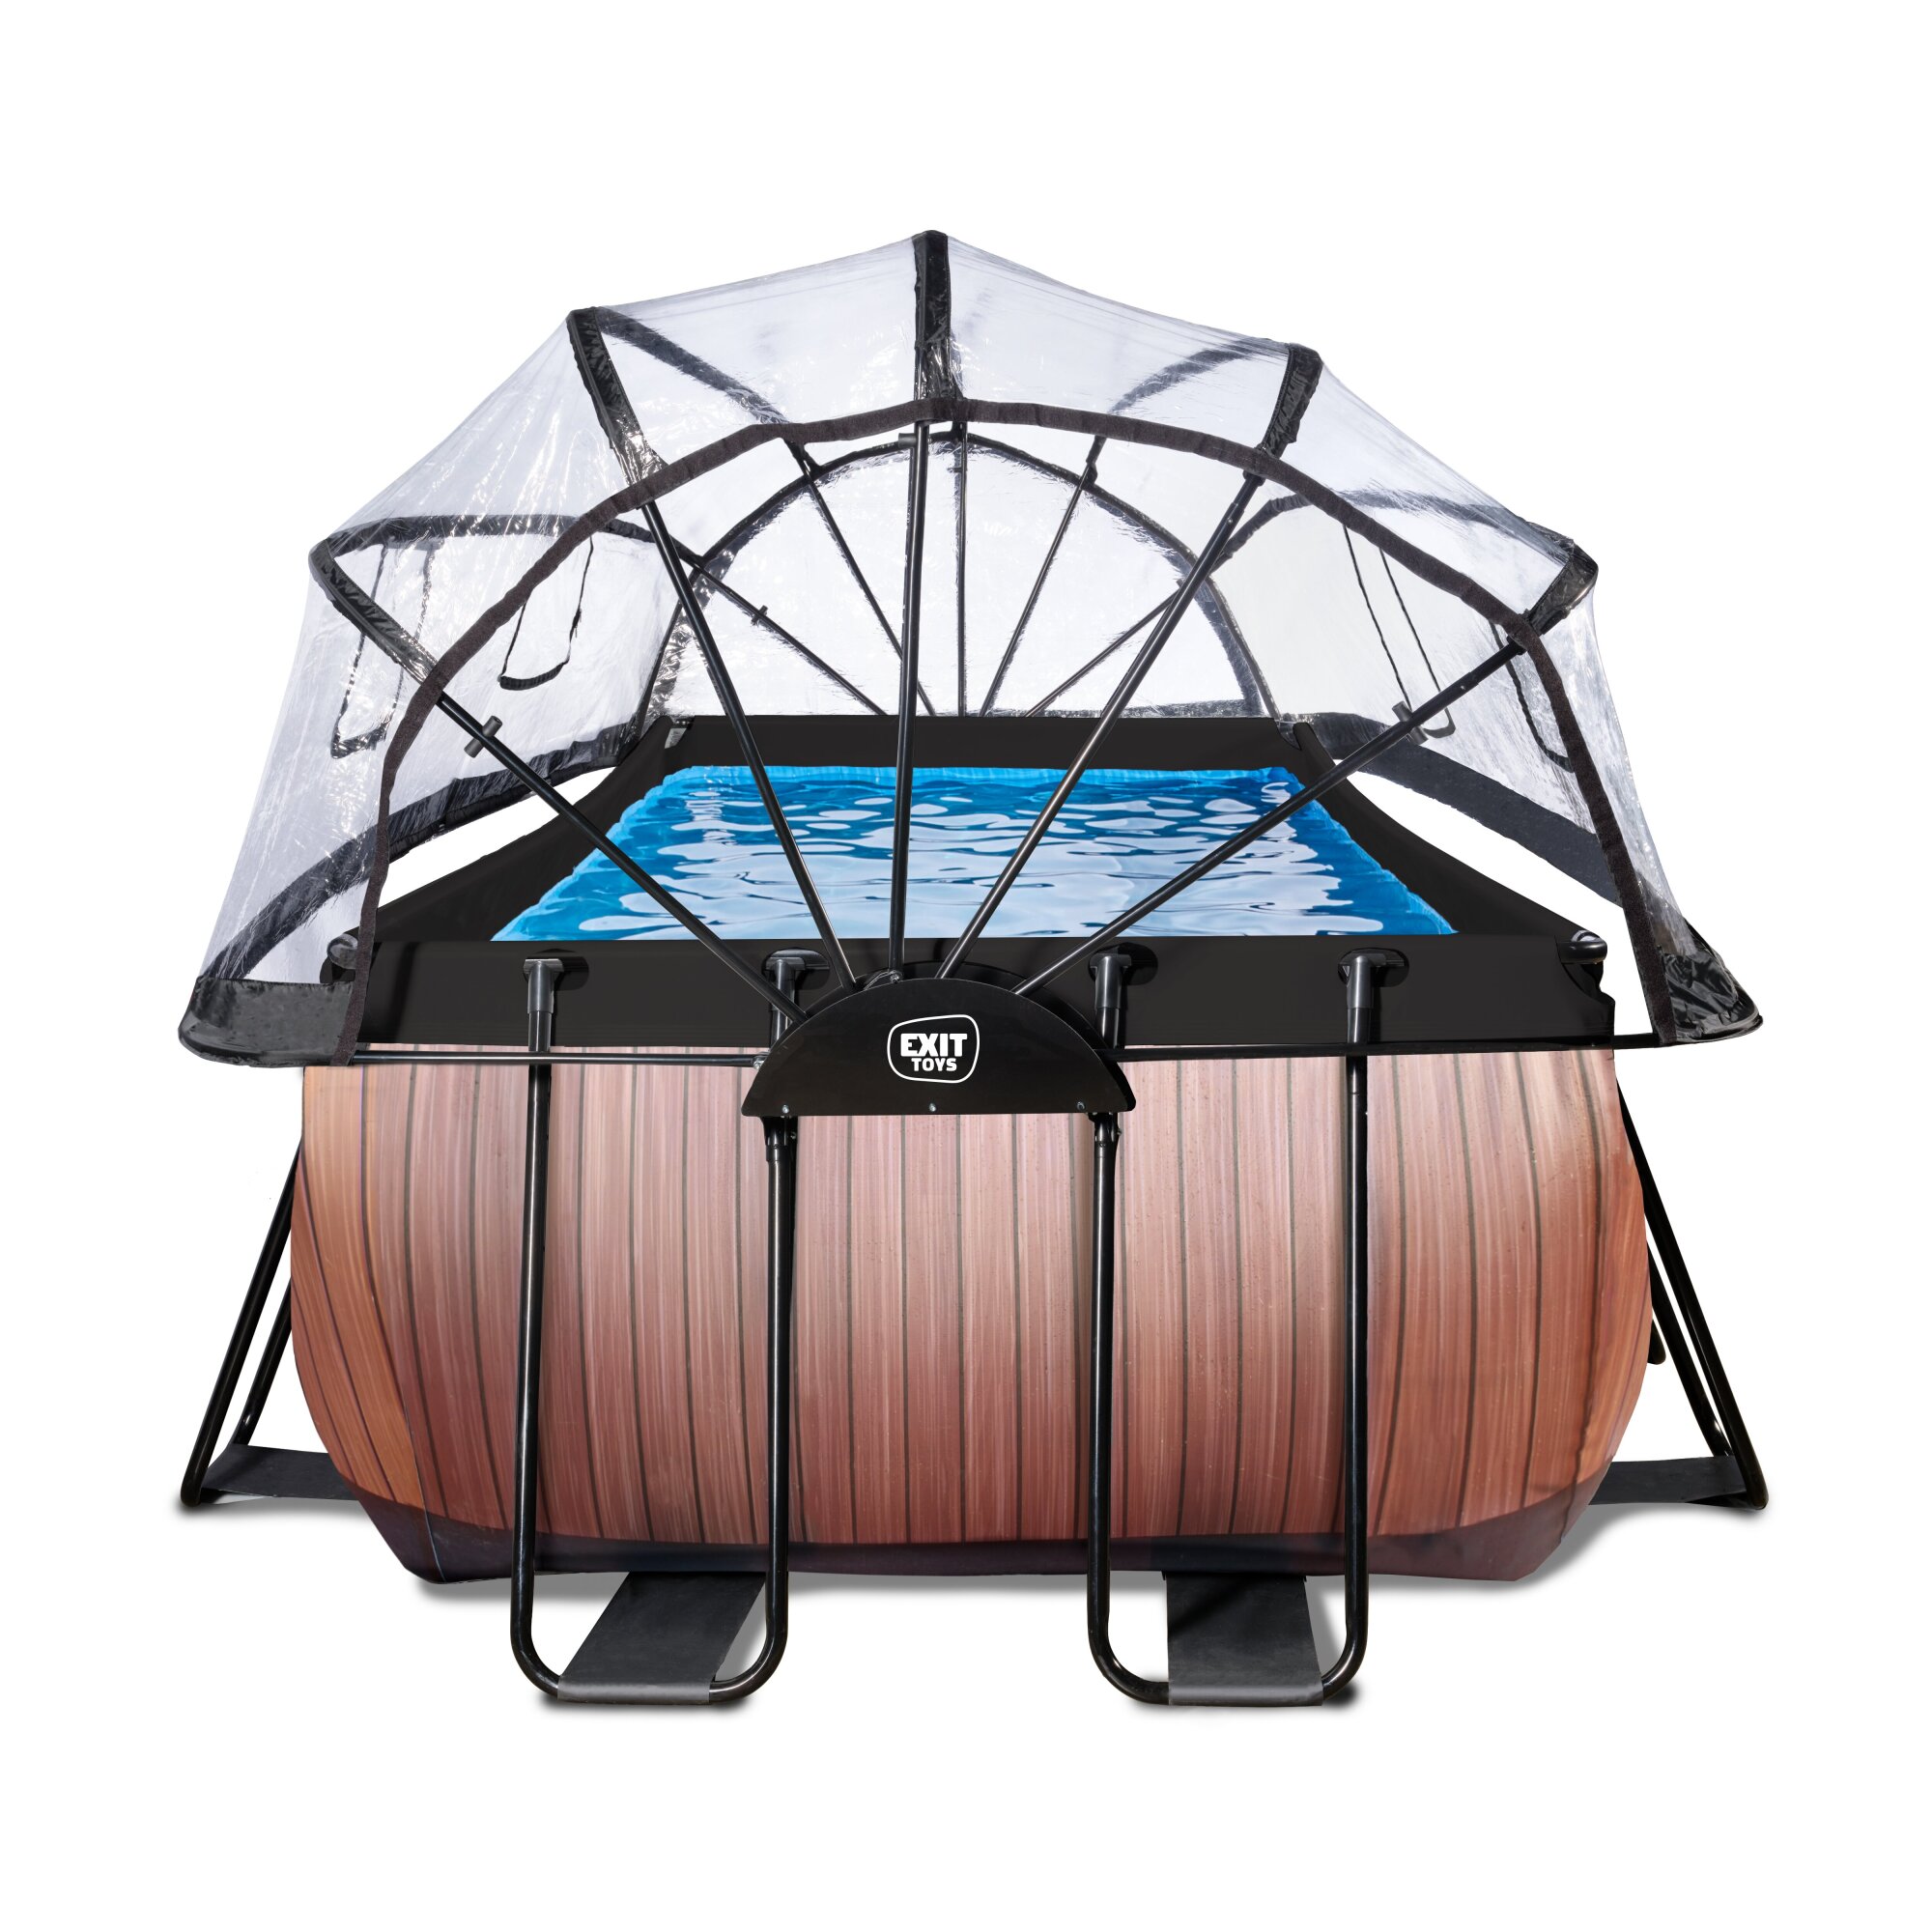 EXIT Wood pool 540x250x100cm with sand filter pump and dome - brown